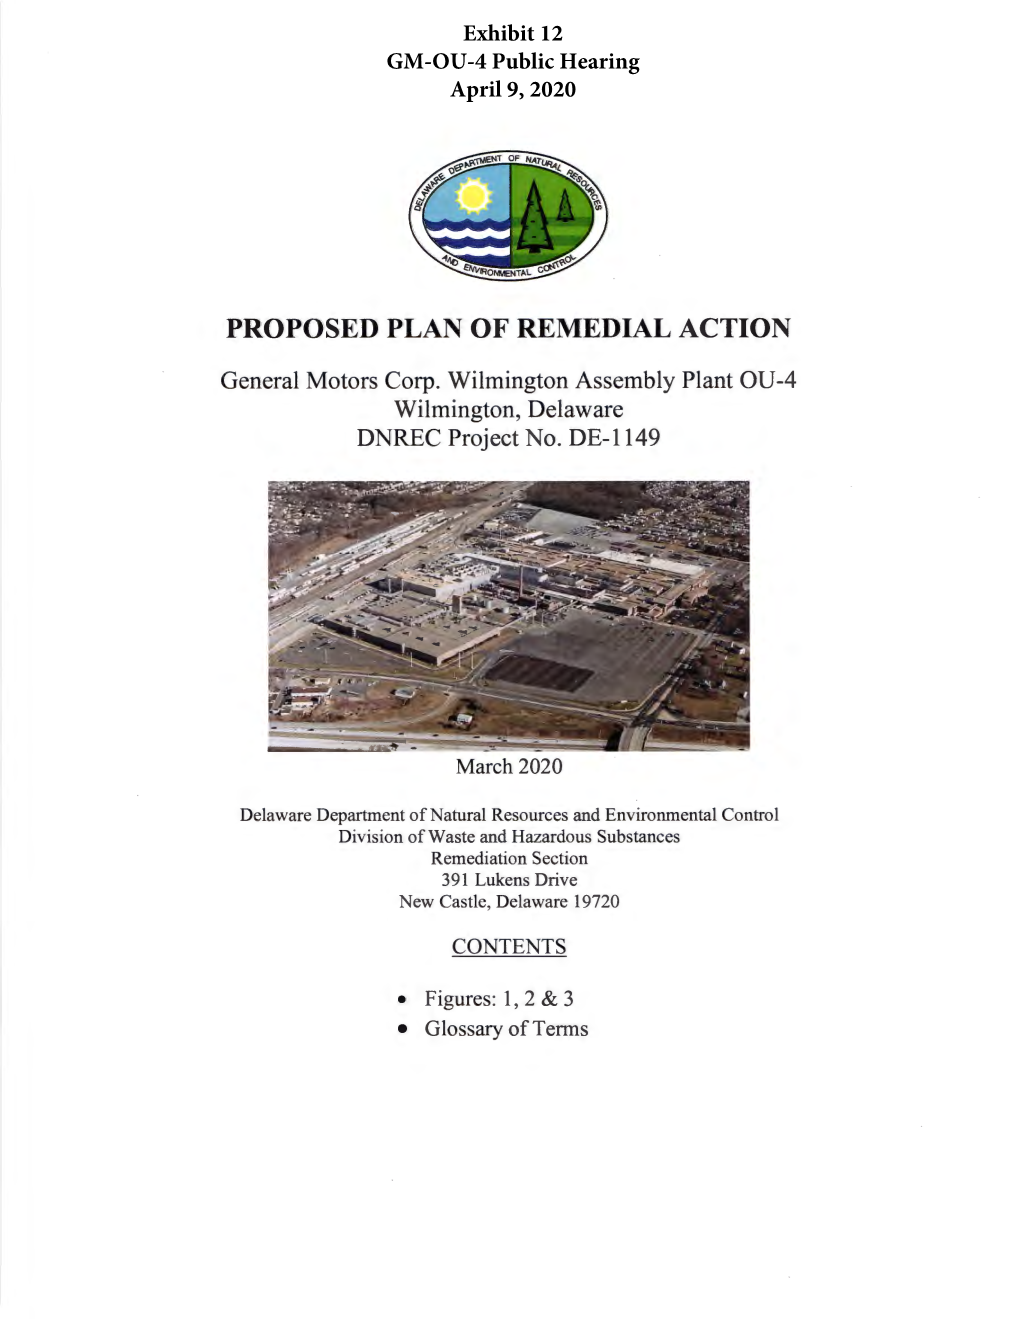 Proposed Plan of Remedial Action